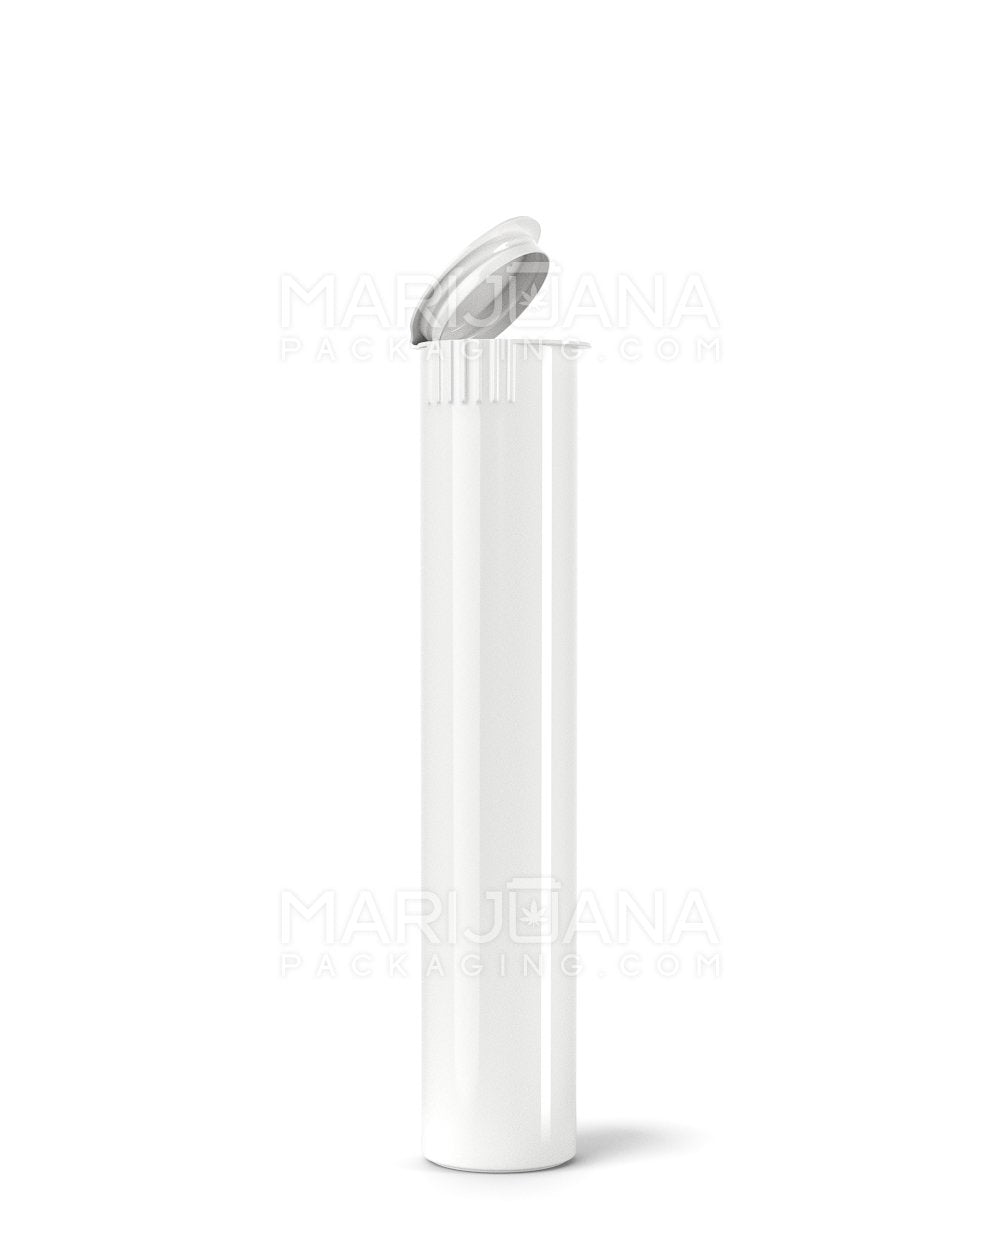 Child Resistant Pop Top Opaque Plastic Pre-Roll Tubes | 98mm - White | Sample - 1